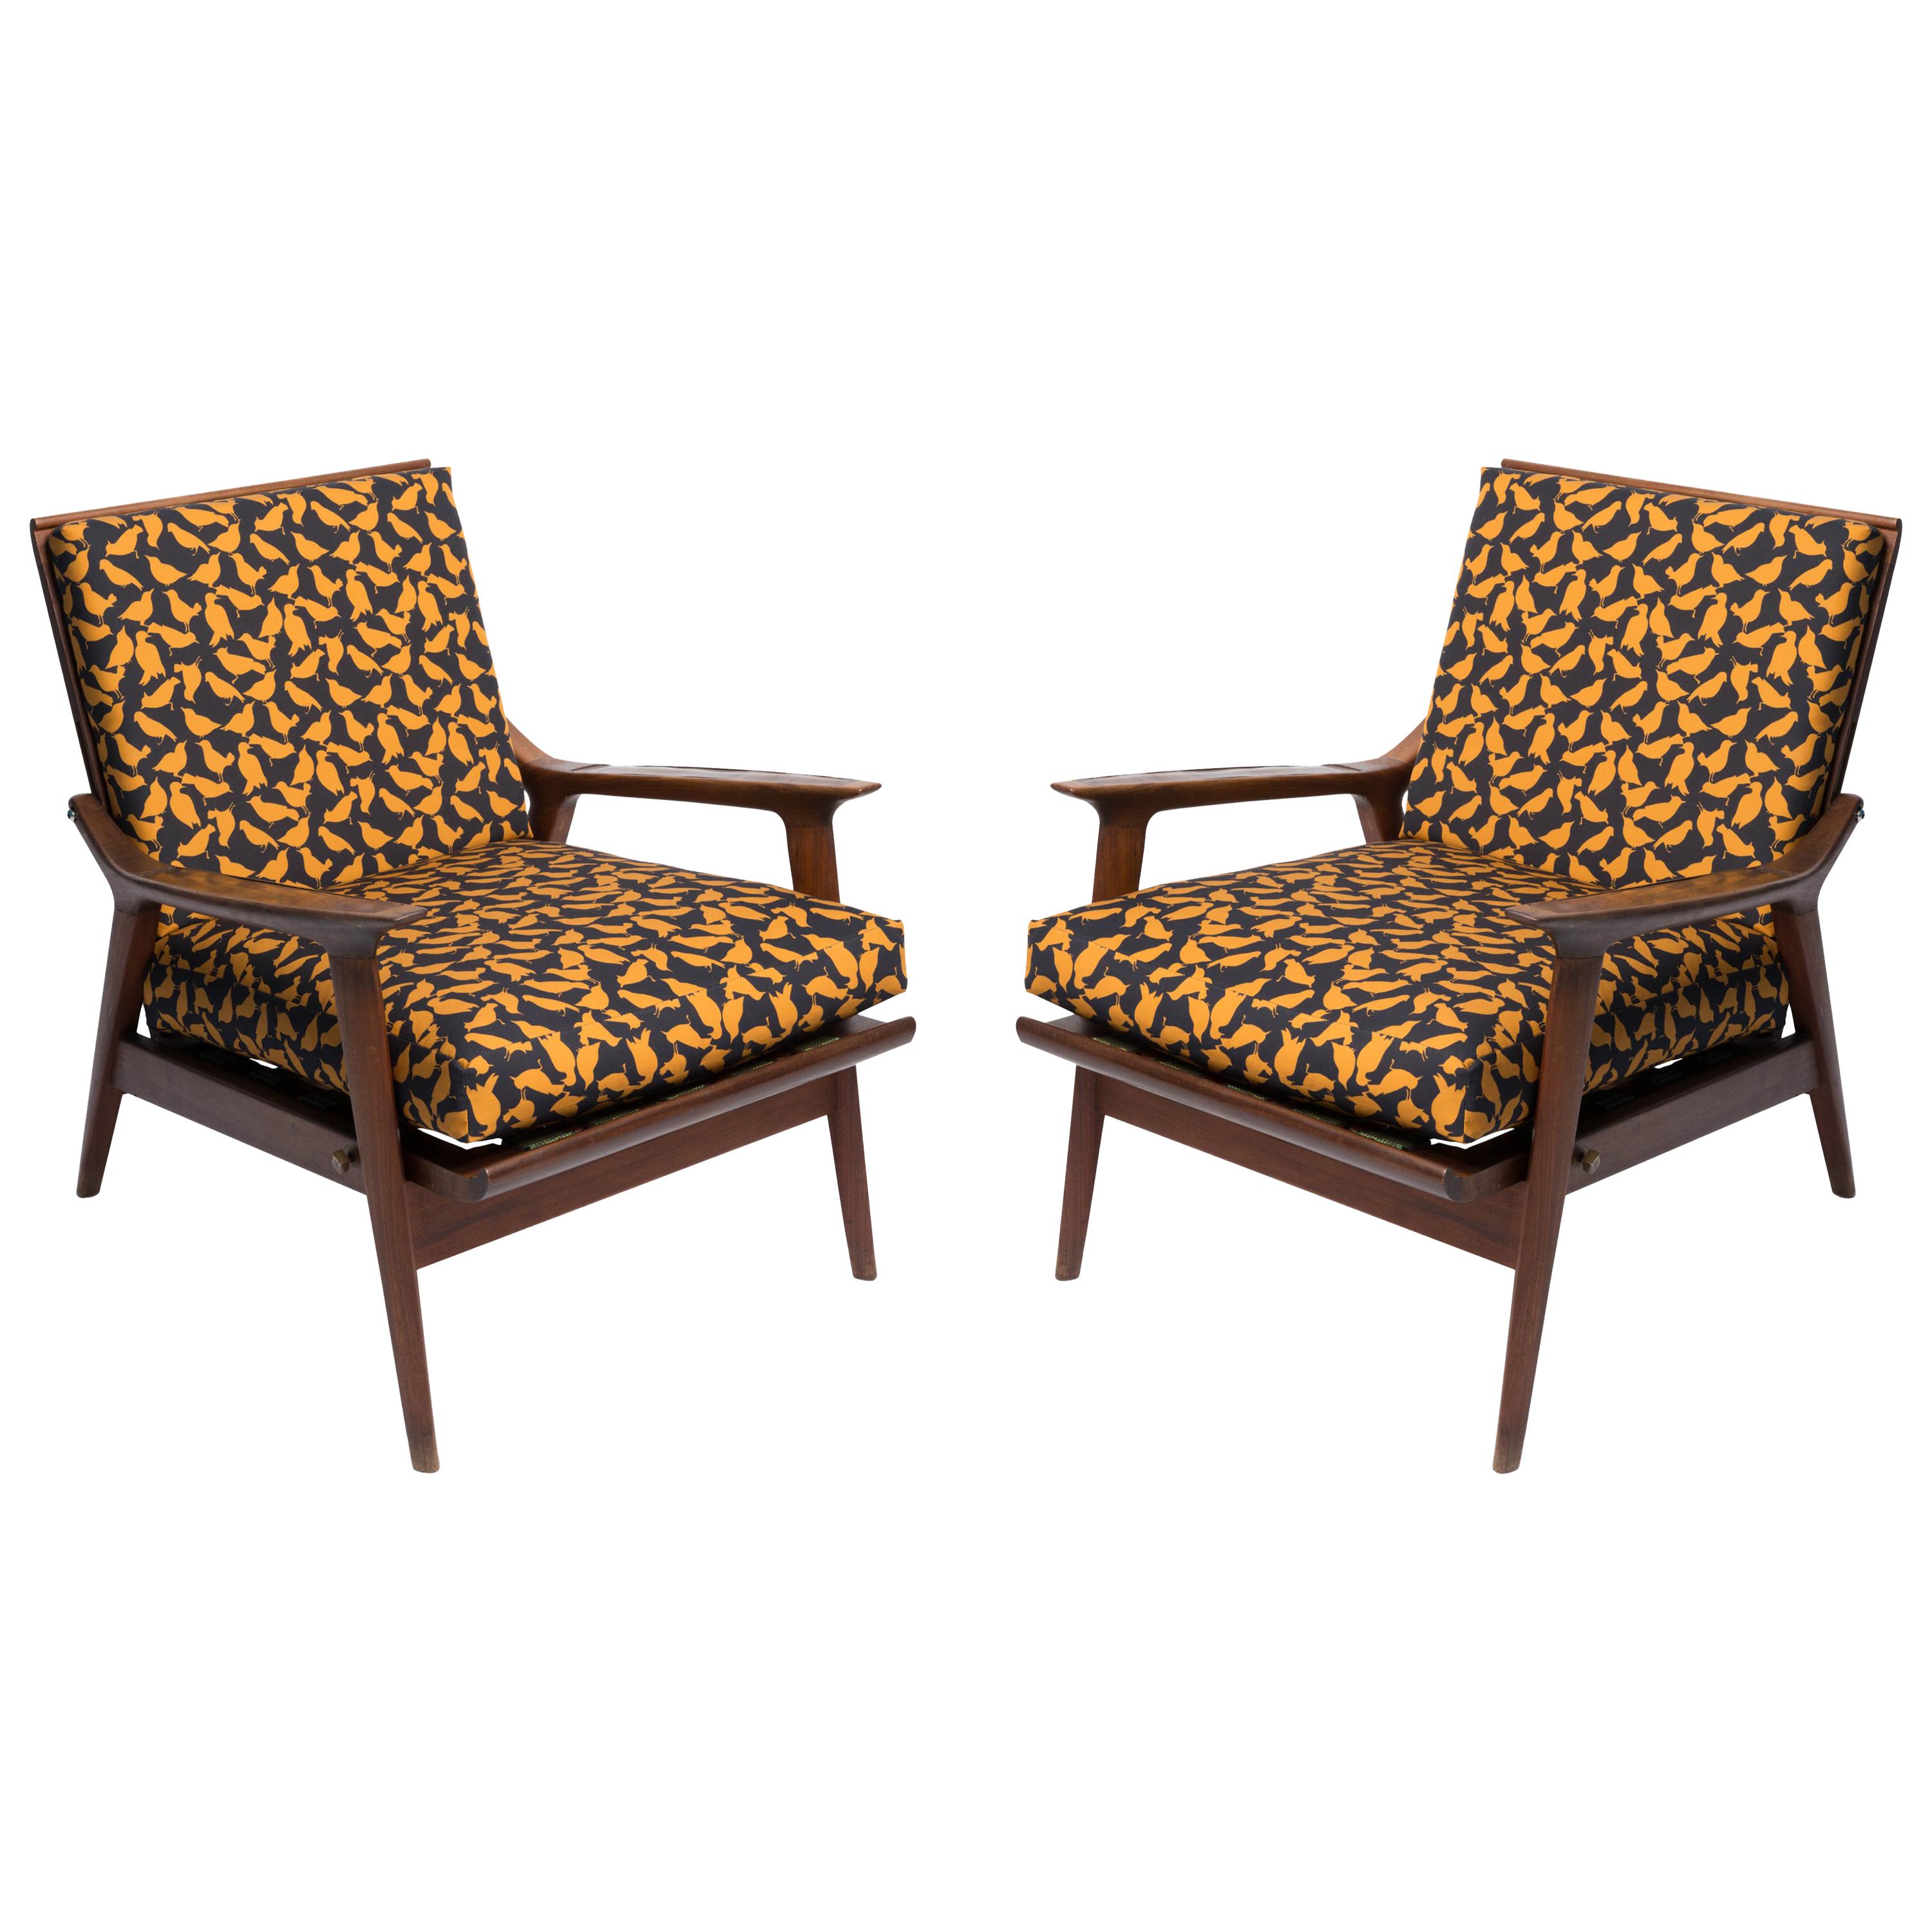 Pair of 1950s Italian Armchairs Featuring Vintage Print Upholstery by LaDoubleJ For Sale